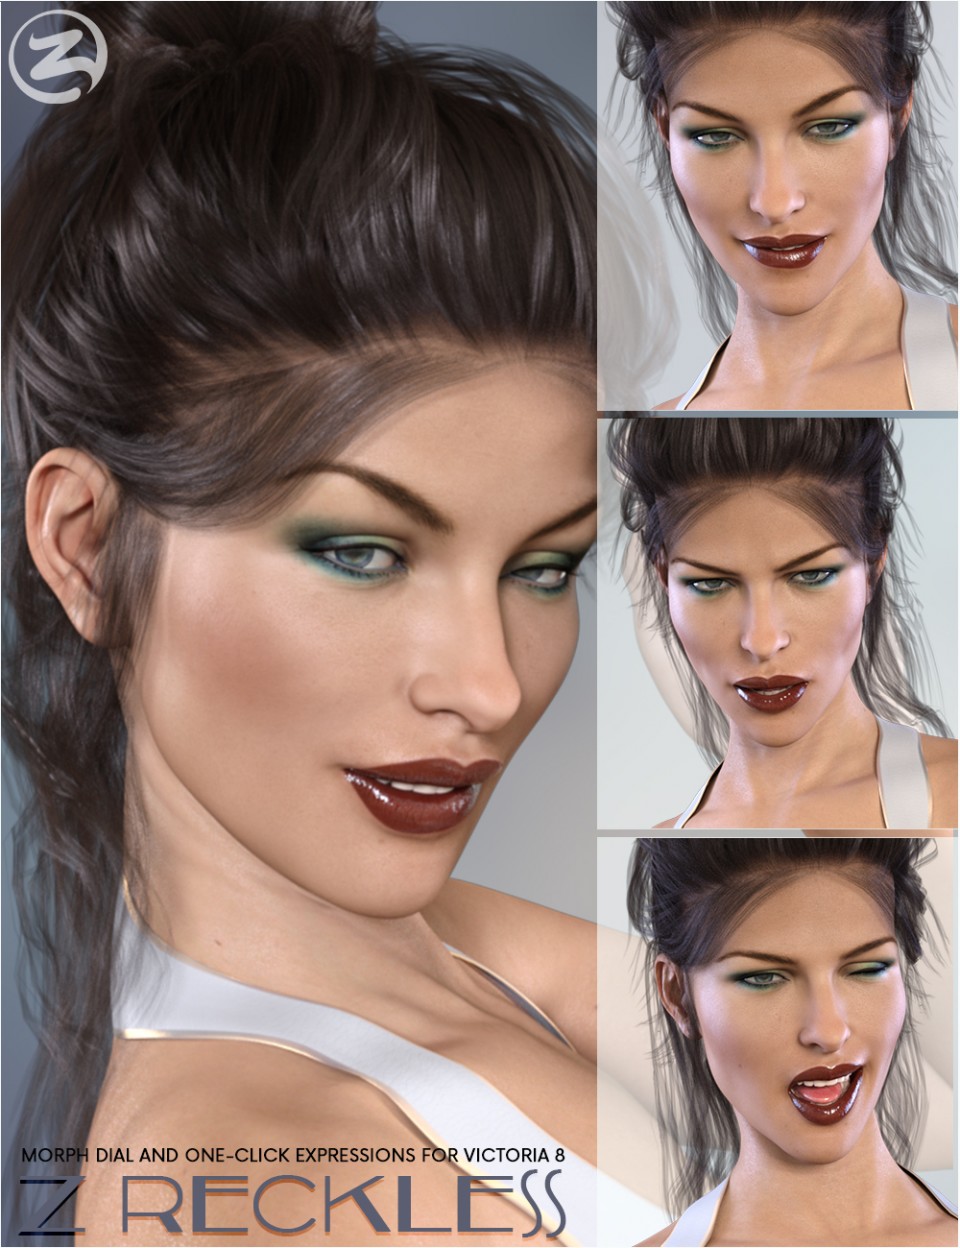 Z Reckless – Dialable and One-Click Expressions for Victoria 8_DAZ3D下载站